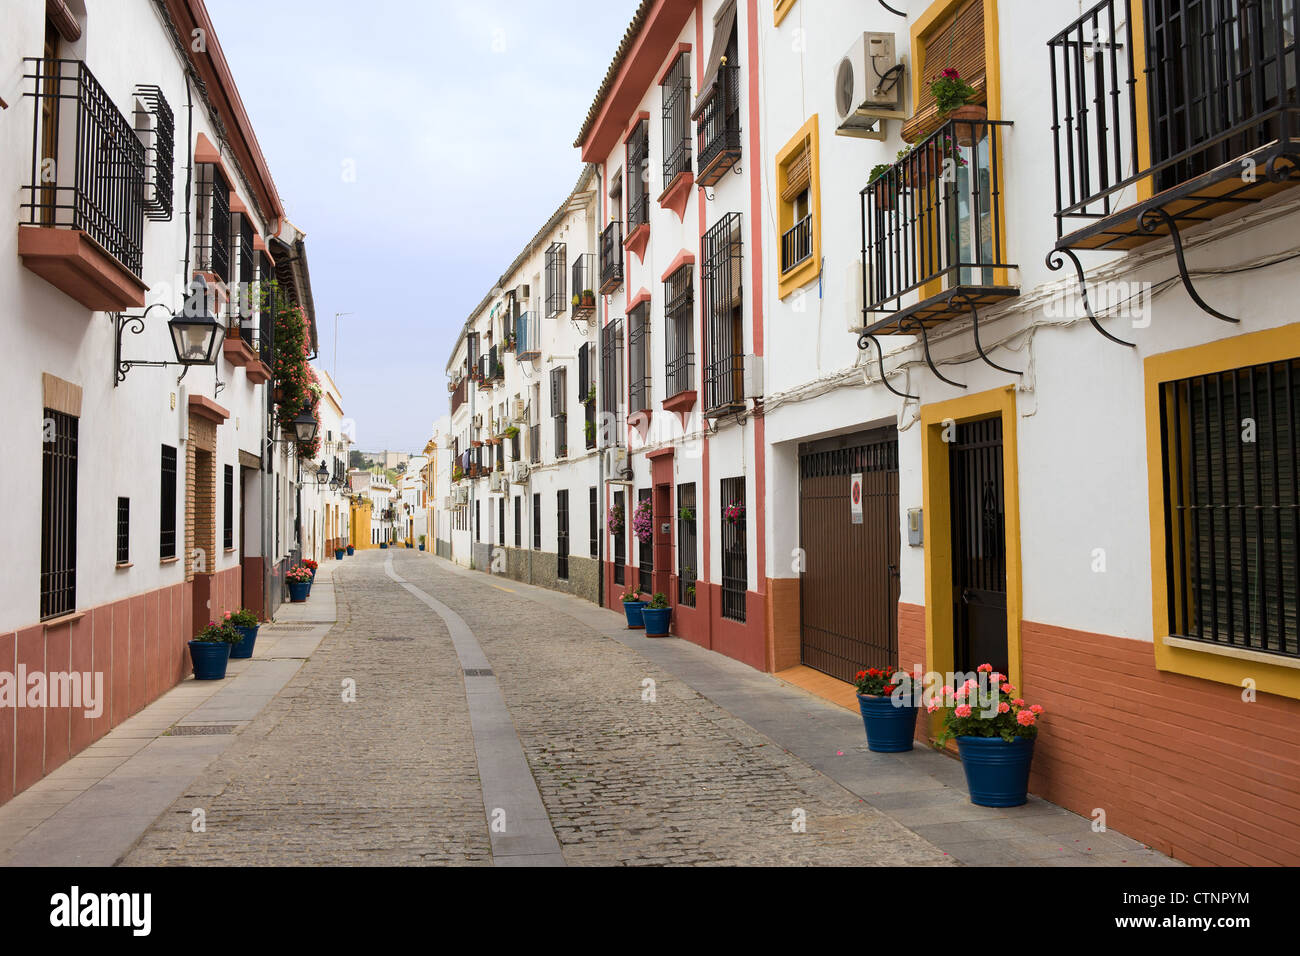 Traditional residential architecture on a tranquil scenic street in the Old Town of Cordoba in Andalusia, Spain. Stock Photo